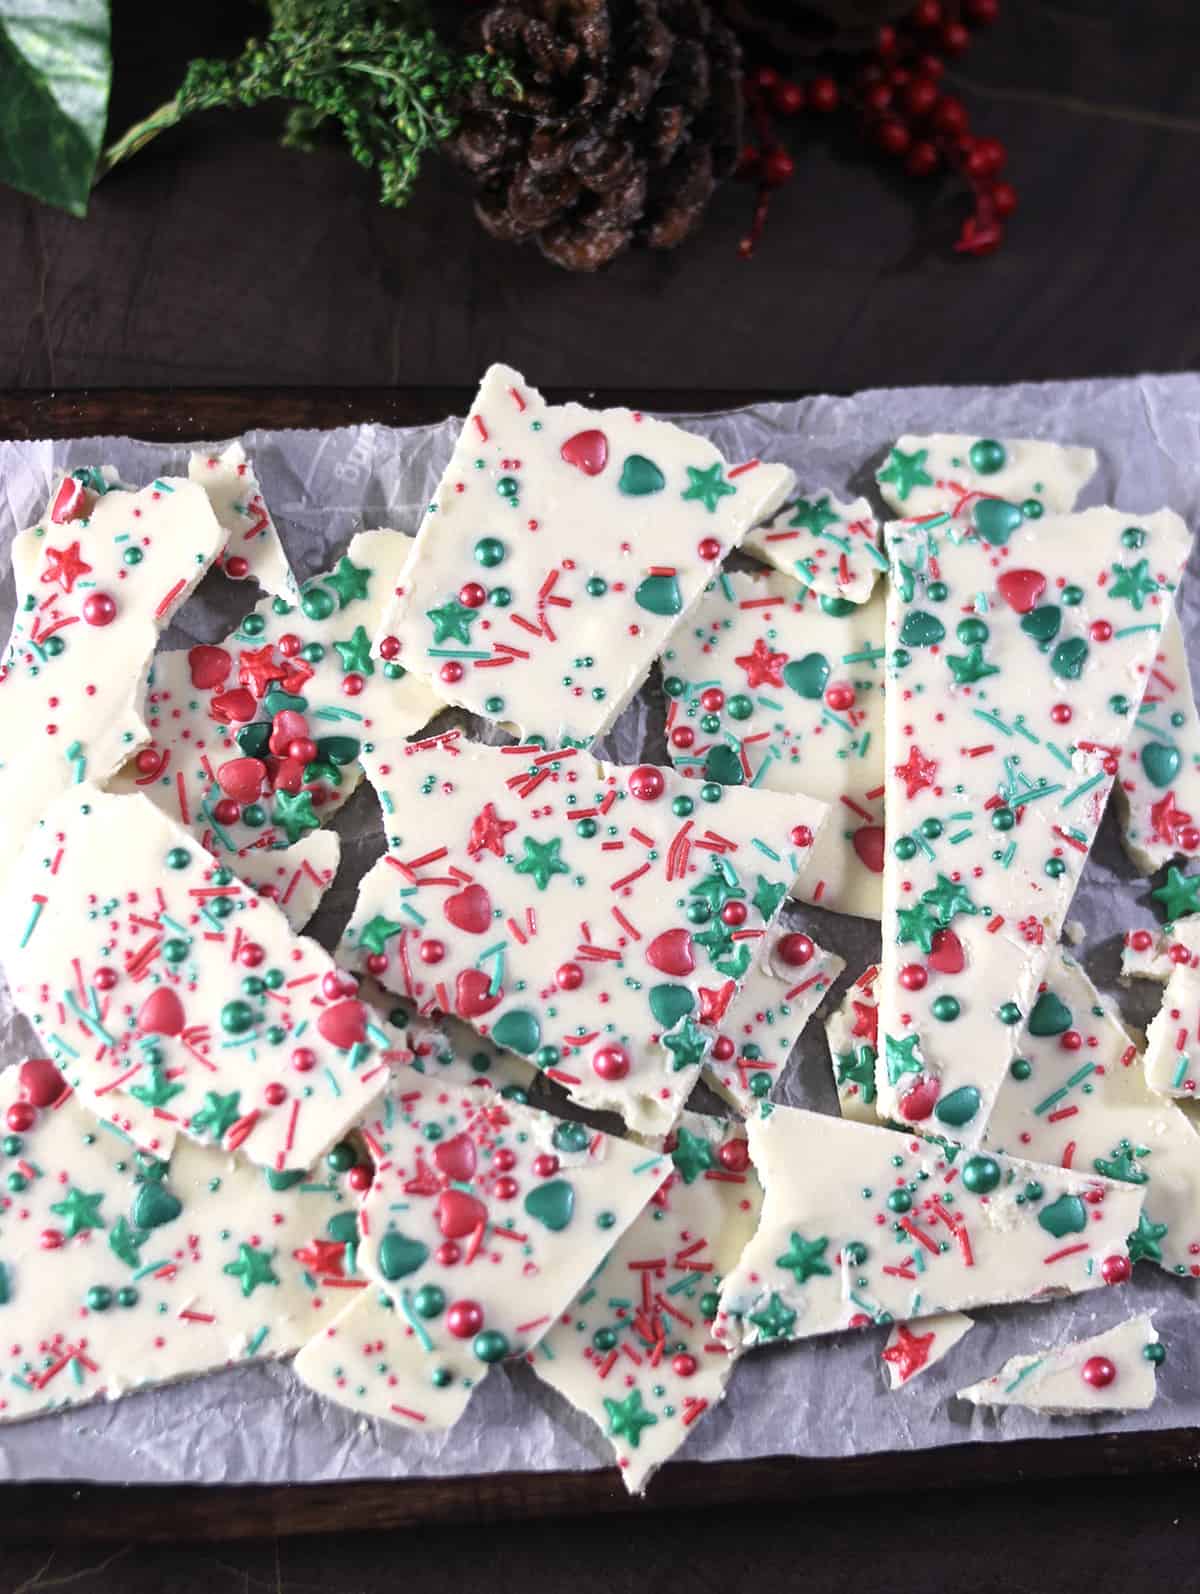 Chocolate barks or Candy treats - best homemade christmas holiday gift idea 